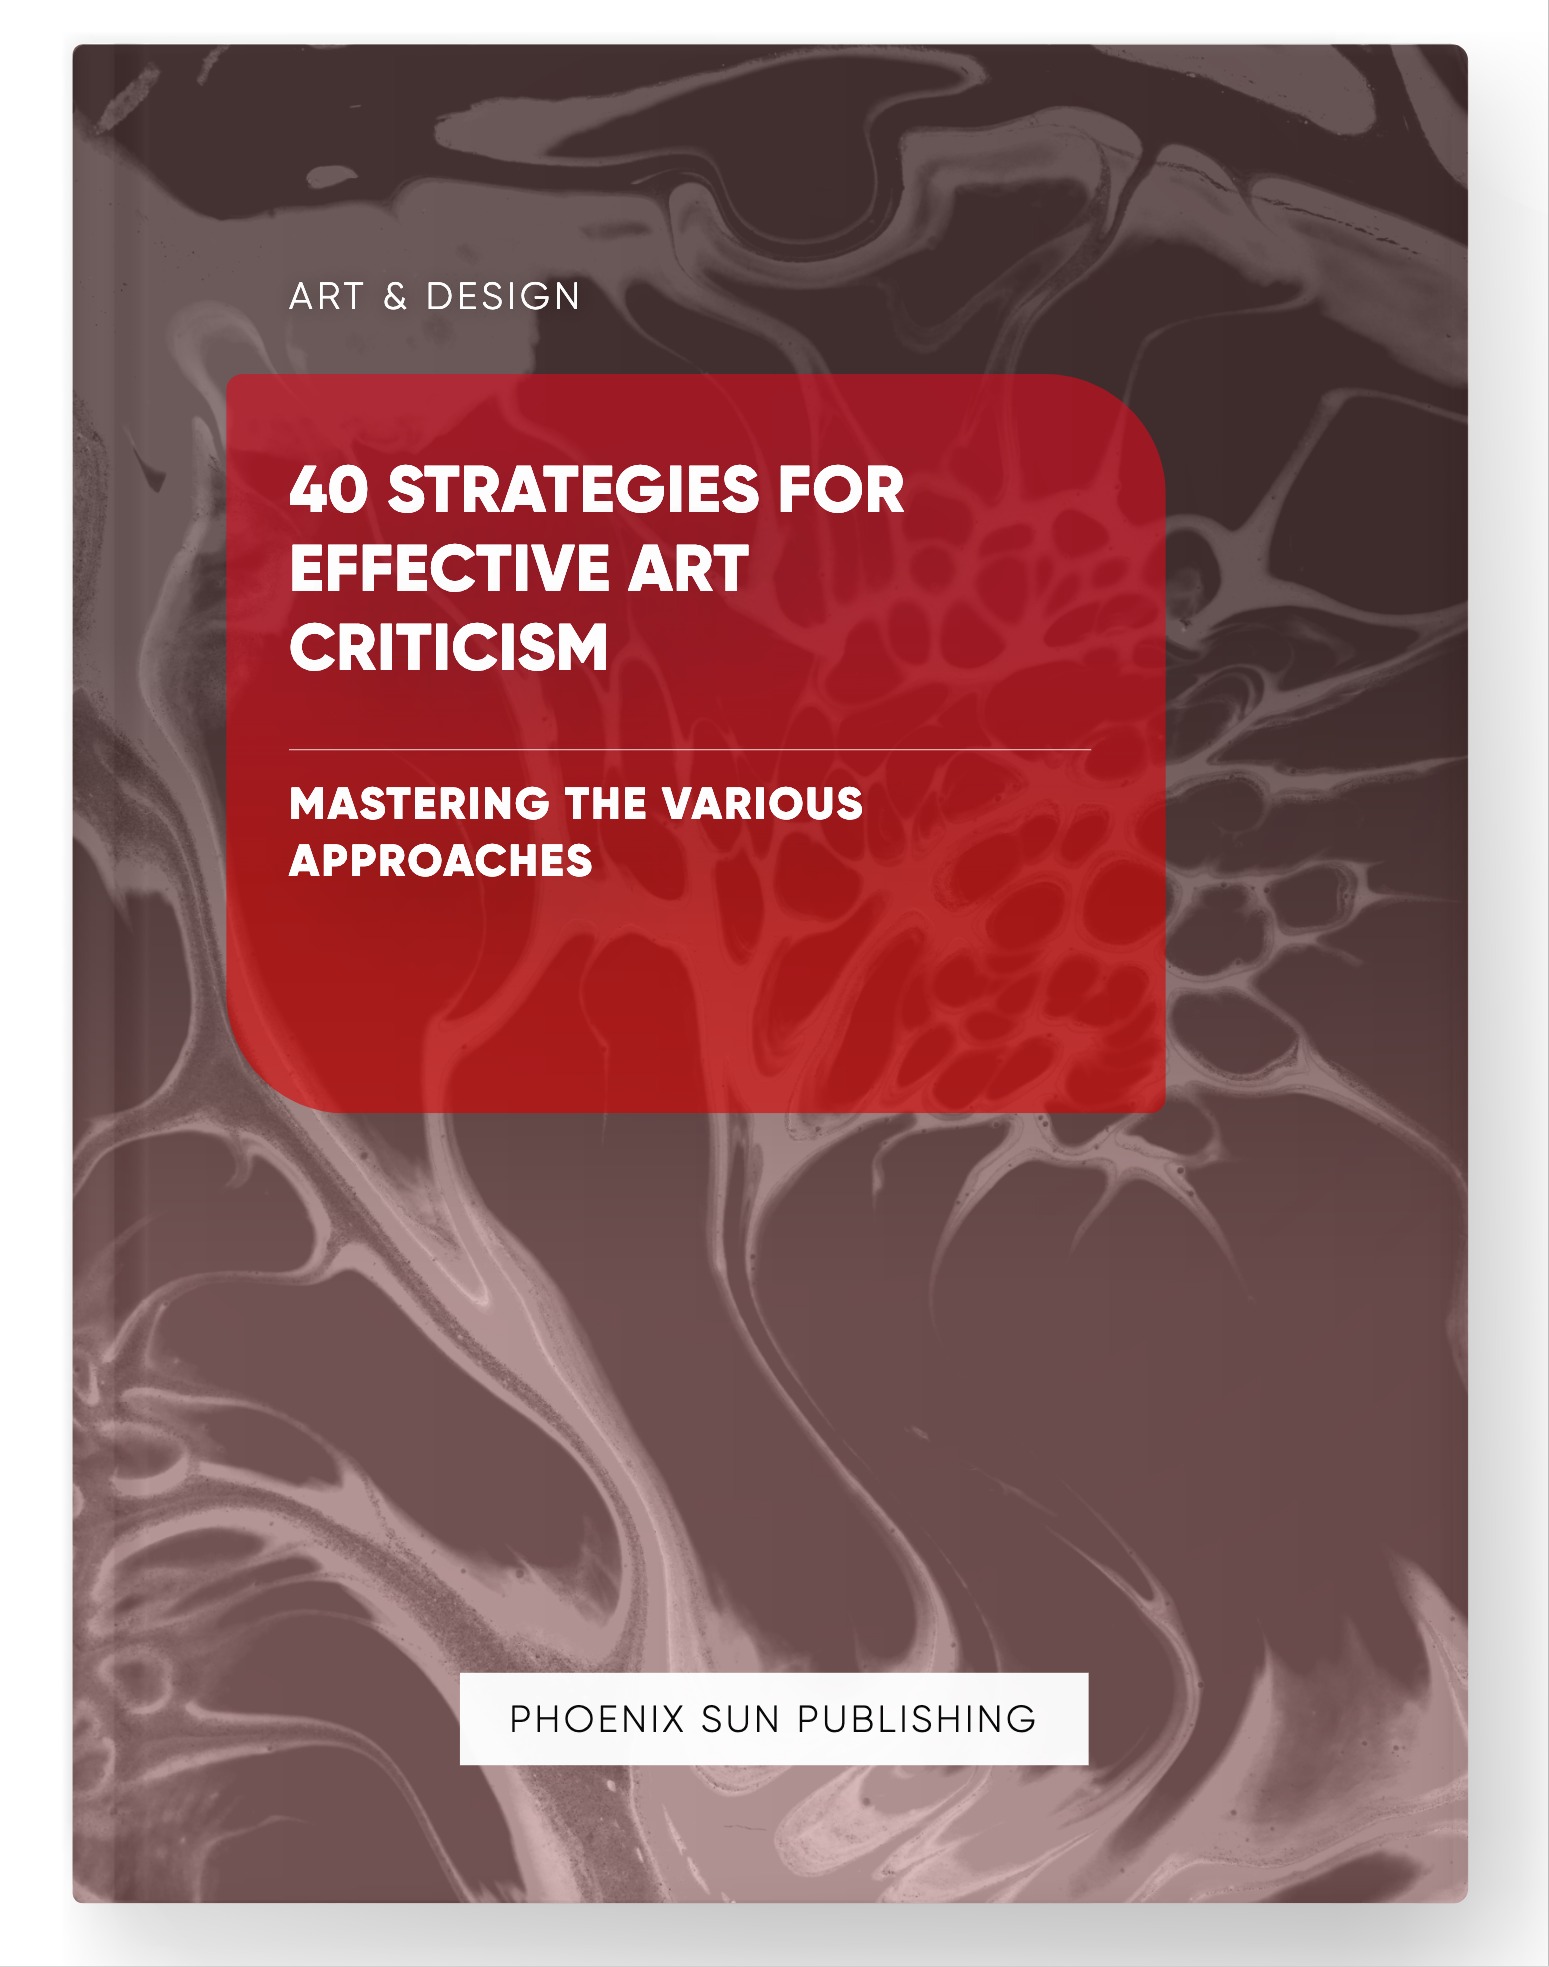 40 Strategies for Effective Art Criticism – Mastering the Various Approaches